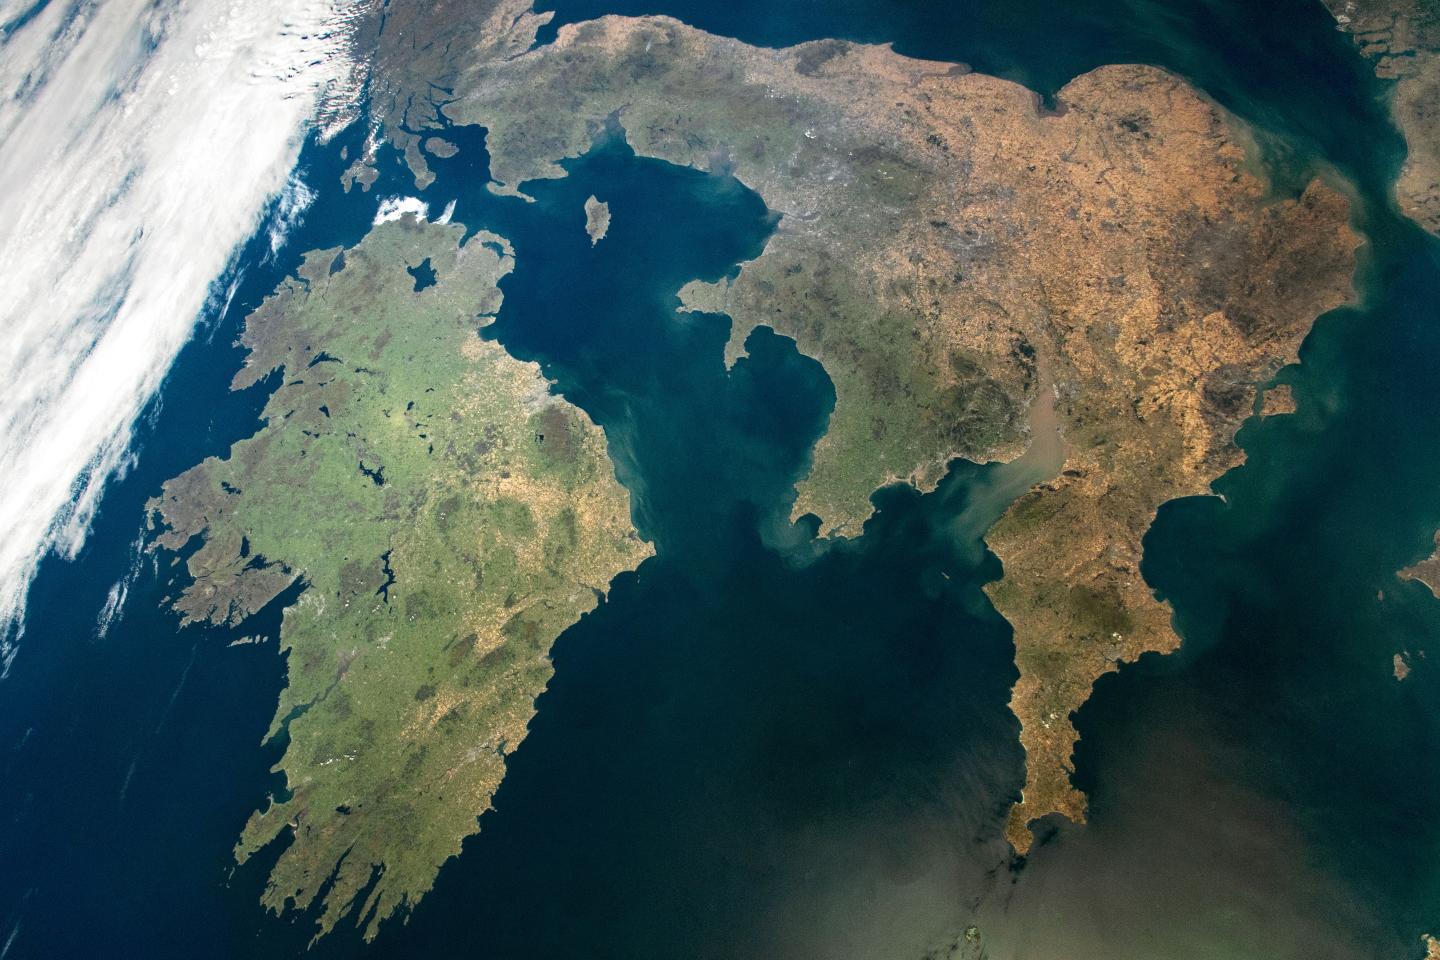 Satellite photograph of Great Britain and Ireland during the summer 2022 heatwave. Large swathes of brown in the south and east of England show how the heat has affected the country